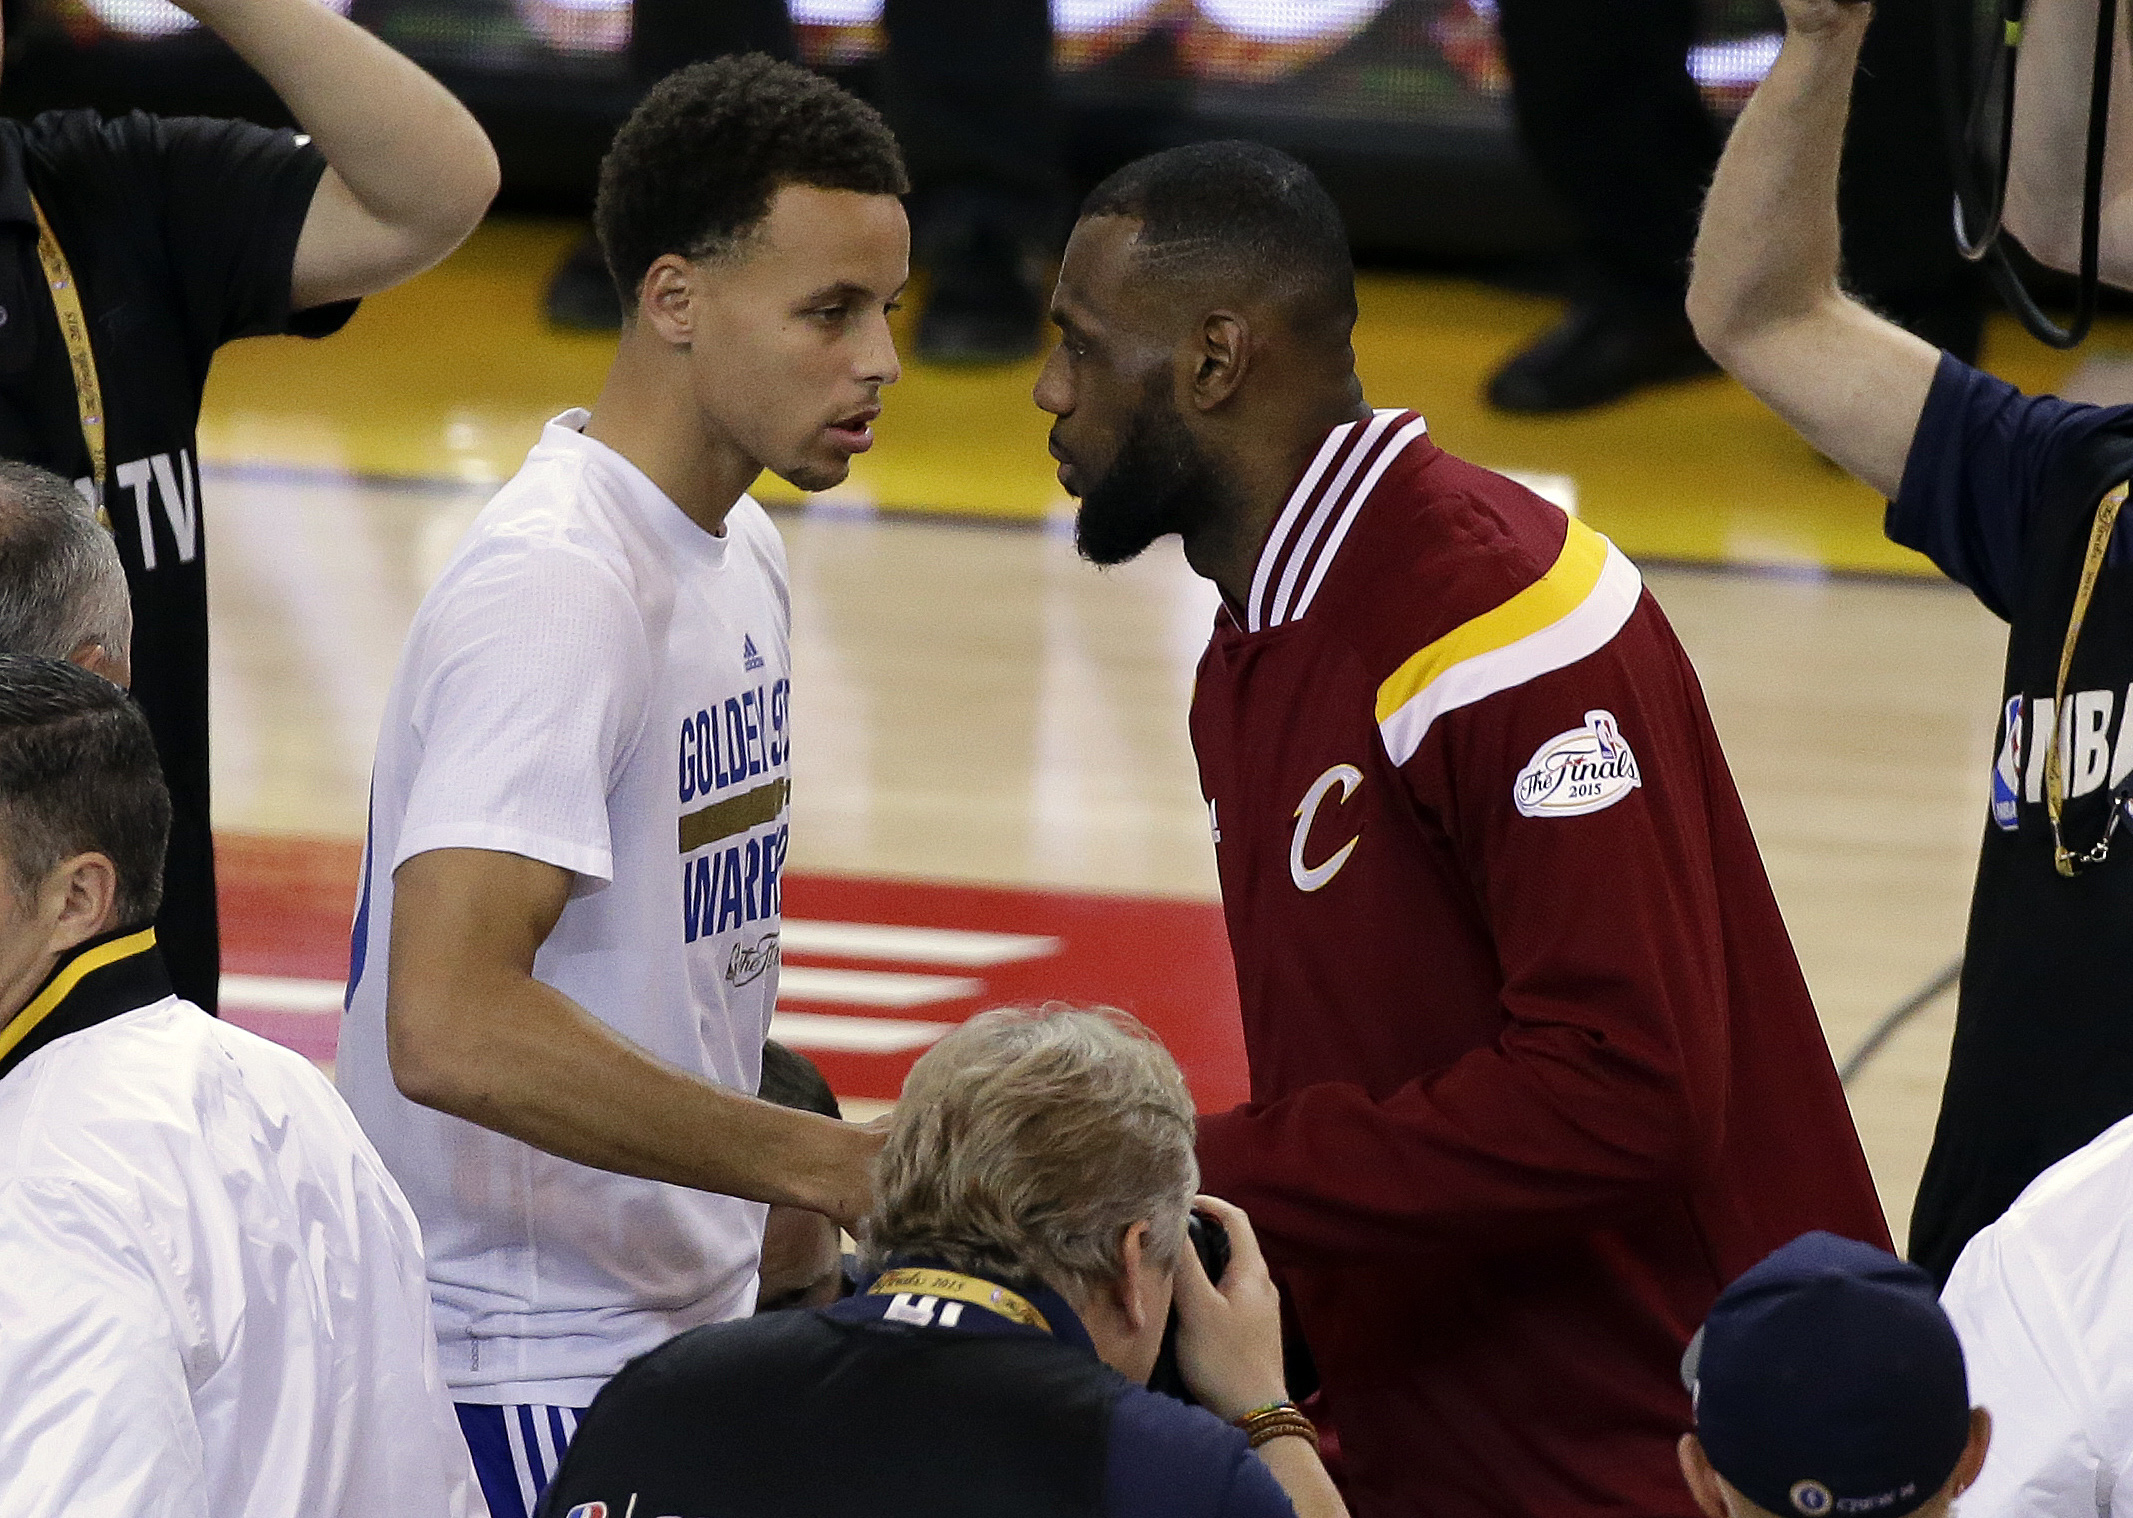 FILE - In this June 14, 2015, file photo, Golden State Warriors guard Stephen Curry, left, shakes hands with Cleveland Cavaliers forward LeBron James before Game 5 of basketball's NBA Finals in Oakland, Calif. While there have been 14 rematches in NBA Finals history, this year's meeting between LeBron James' Cleveland Cavaliers and Stephen Curry's Golden State Warriors will be the first trilogy in league history. (AP Photo/Eric Risberg)